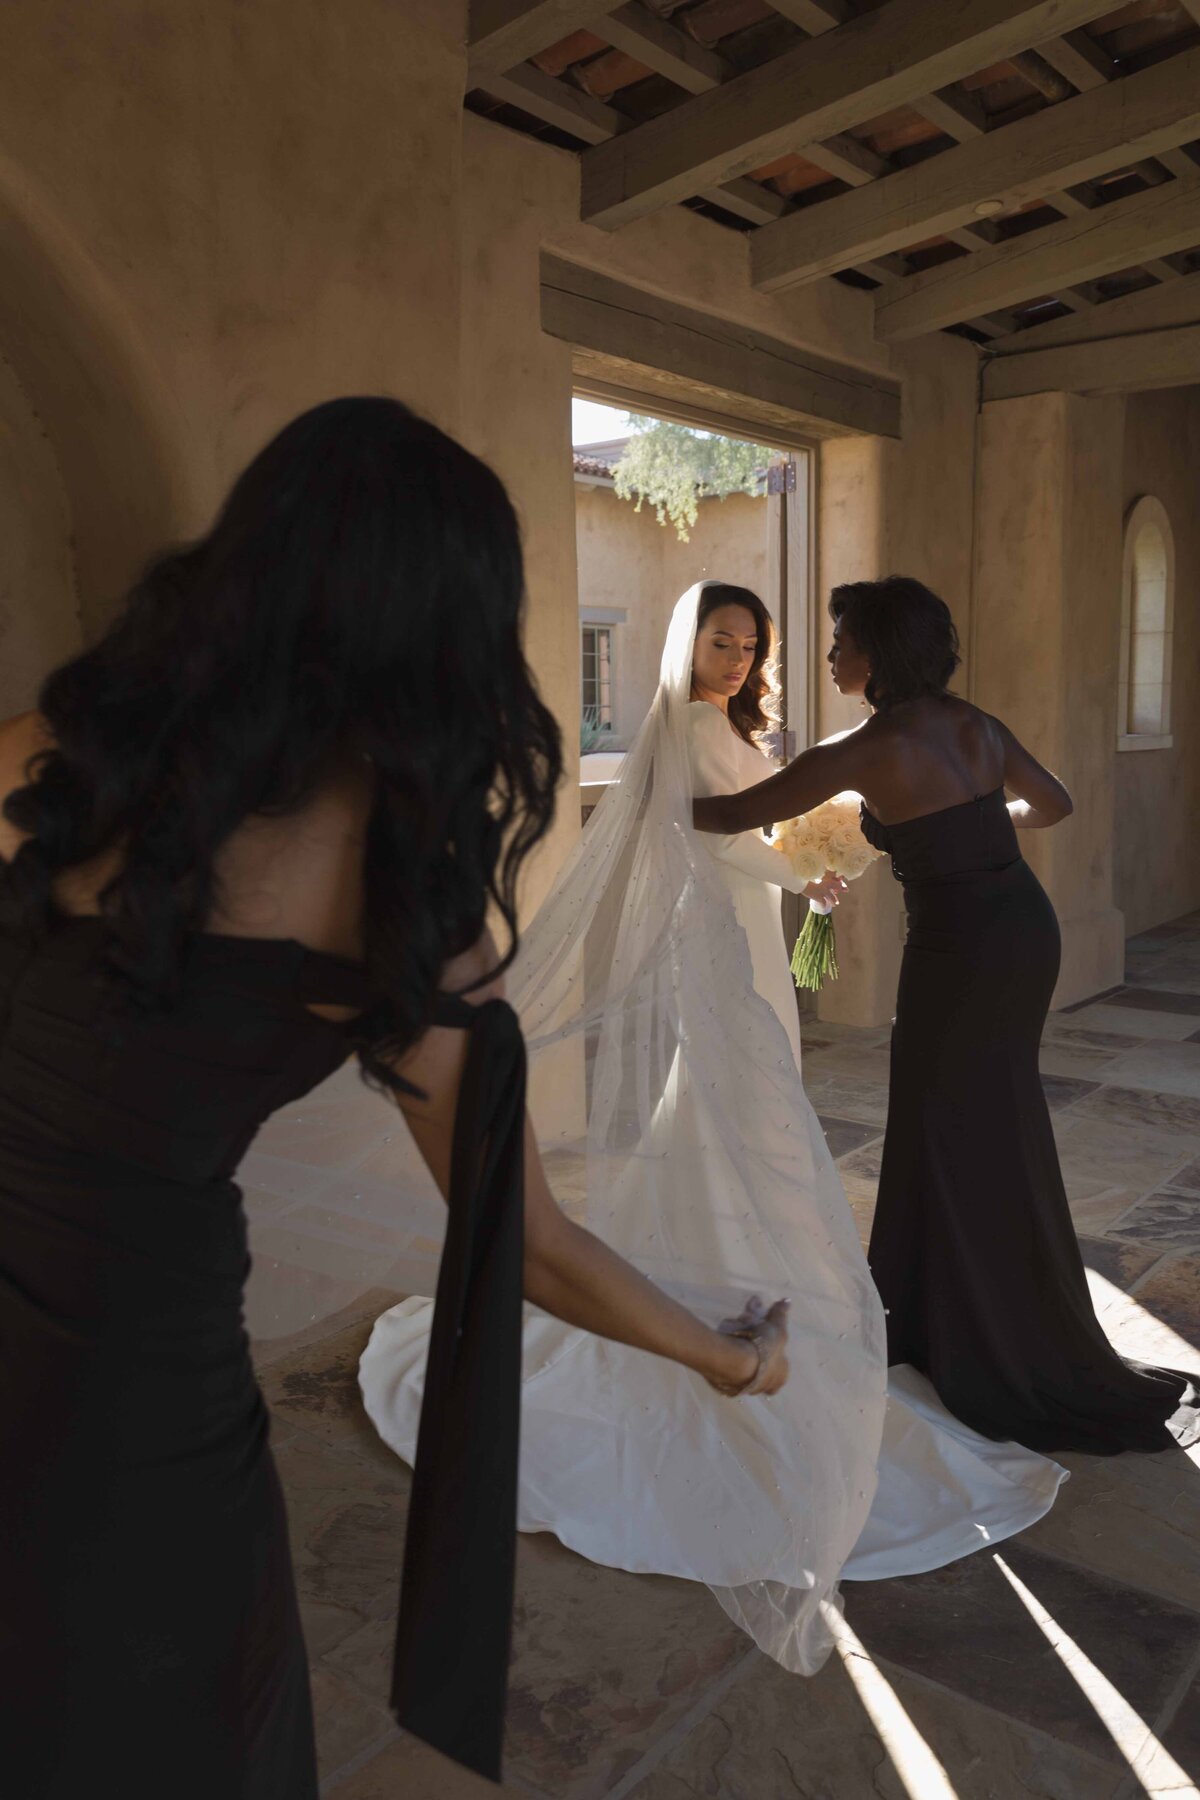 Photographers helping bride to pose in a white dress with a long veil